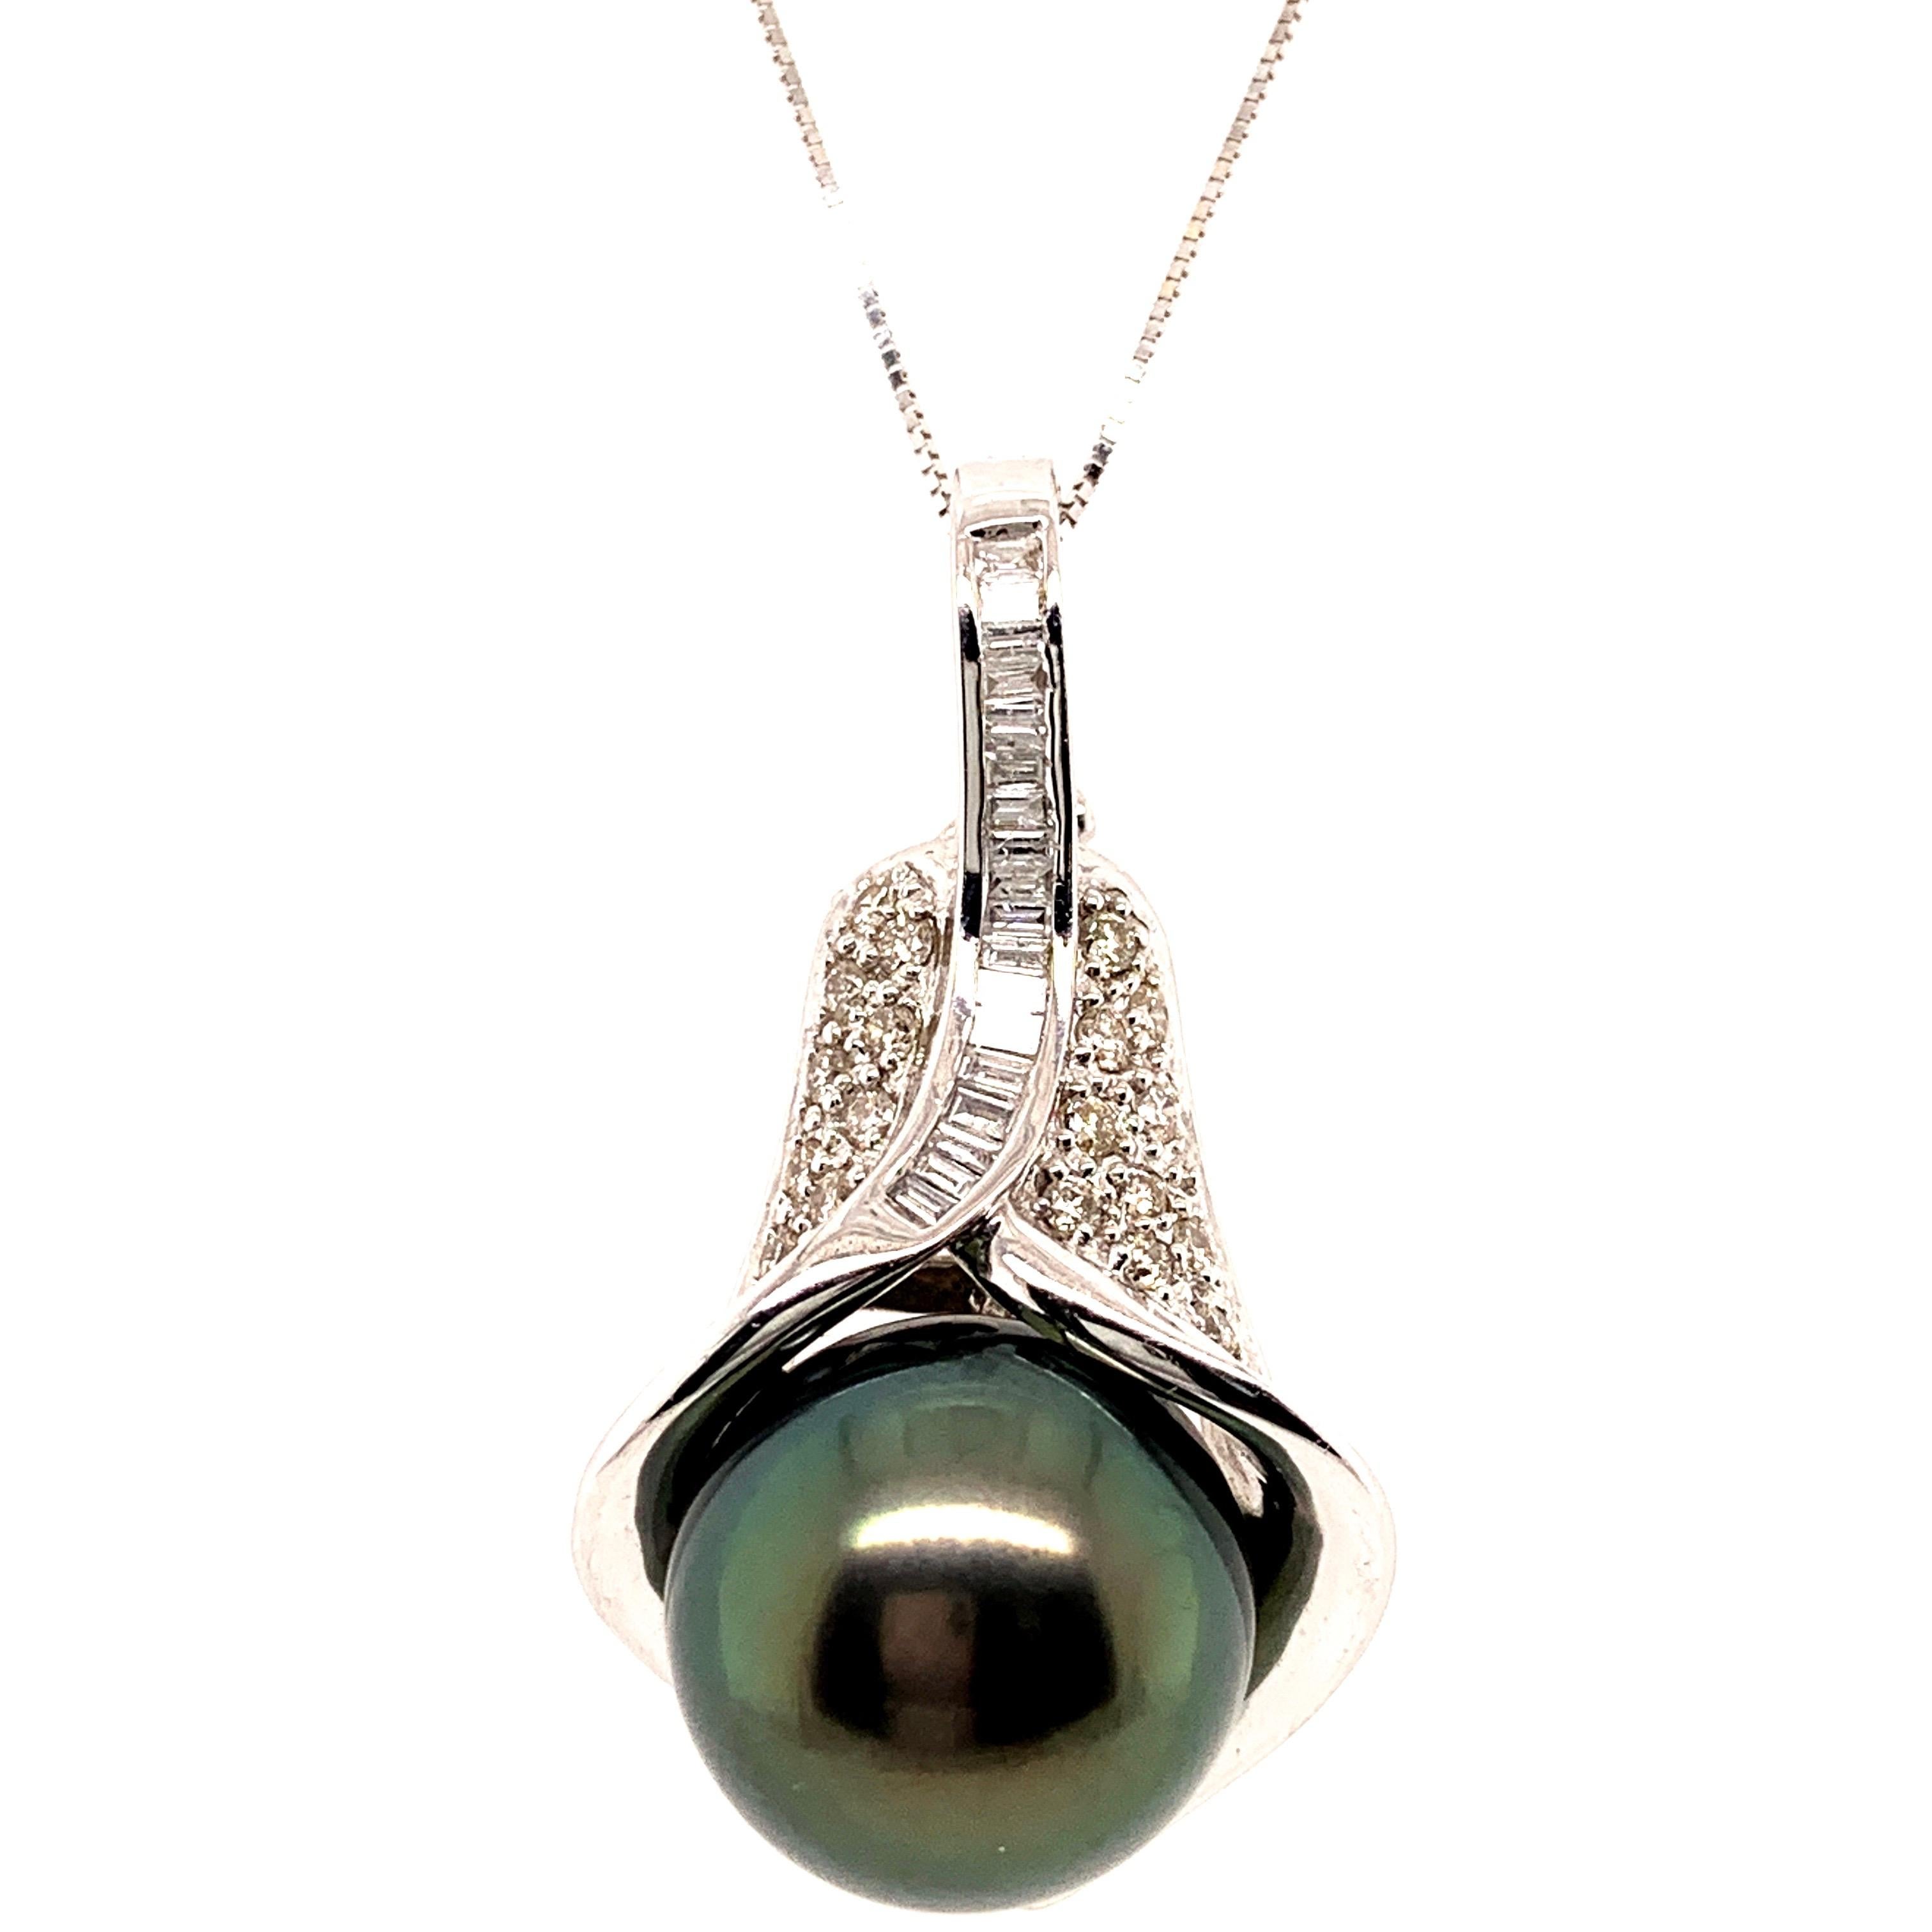 Elegant Tahitian pearl diamond pendant. Very good luster, black with pink, green color overtone, round 13.1 mm Tahitian pearl, mounted in tulip design, accented with baguette and pave set round brilliant cut diamonds. Handcrafted high polished